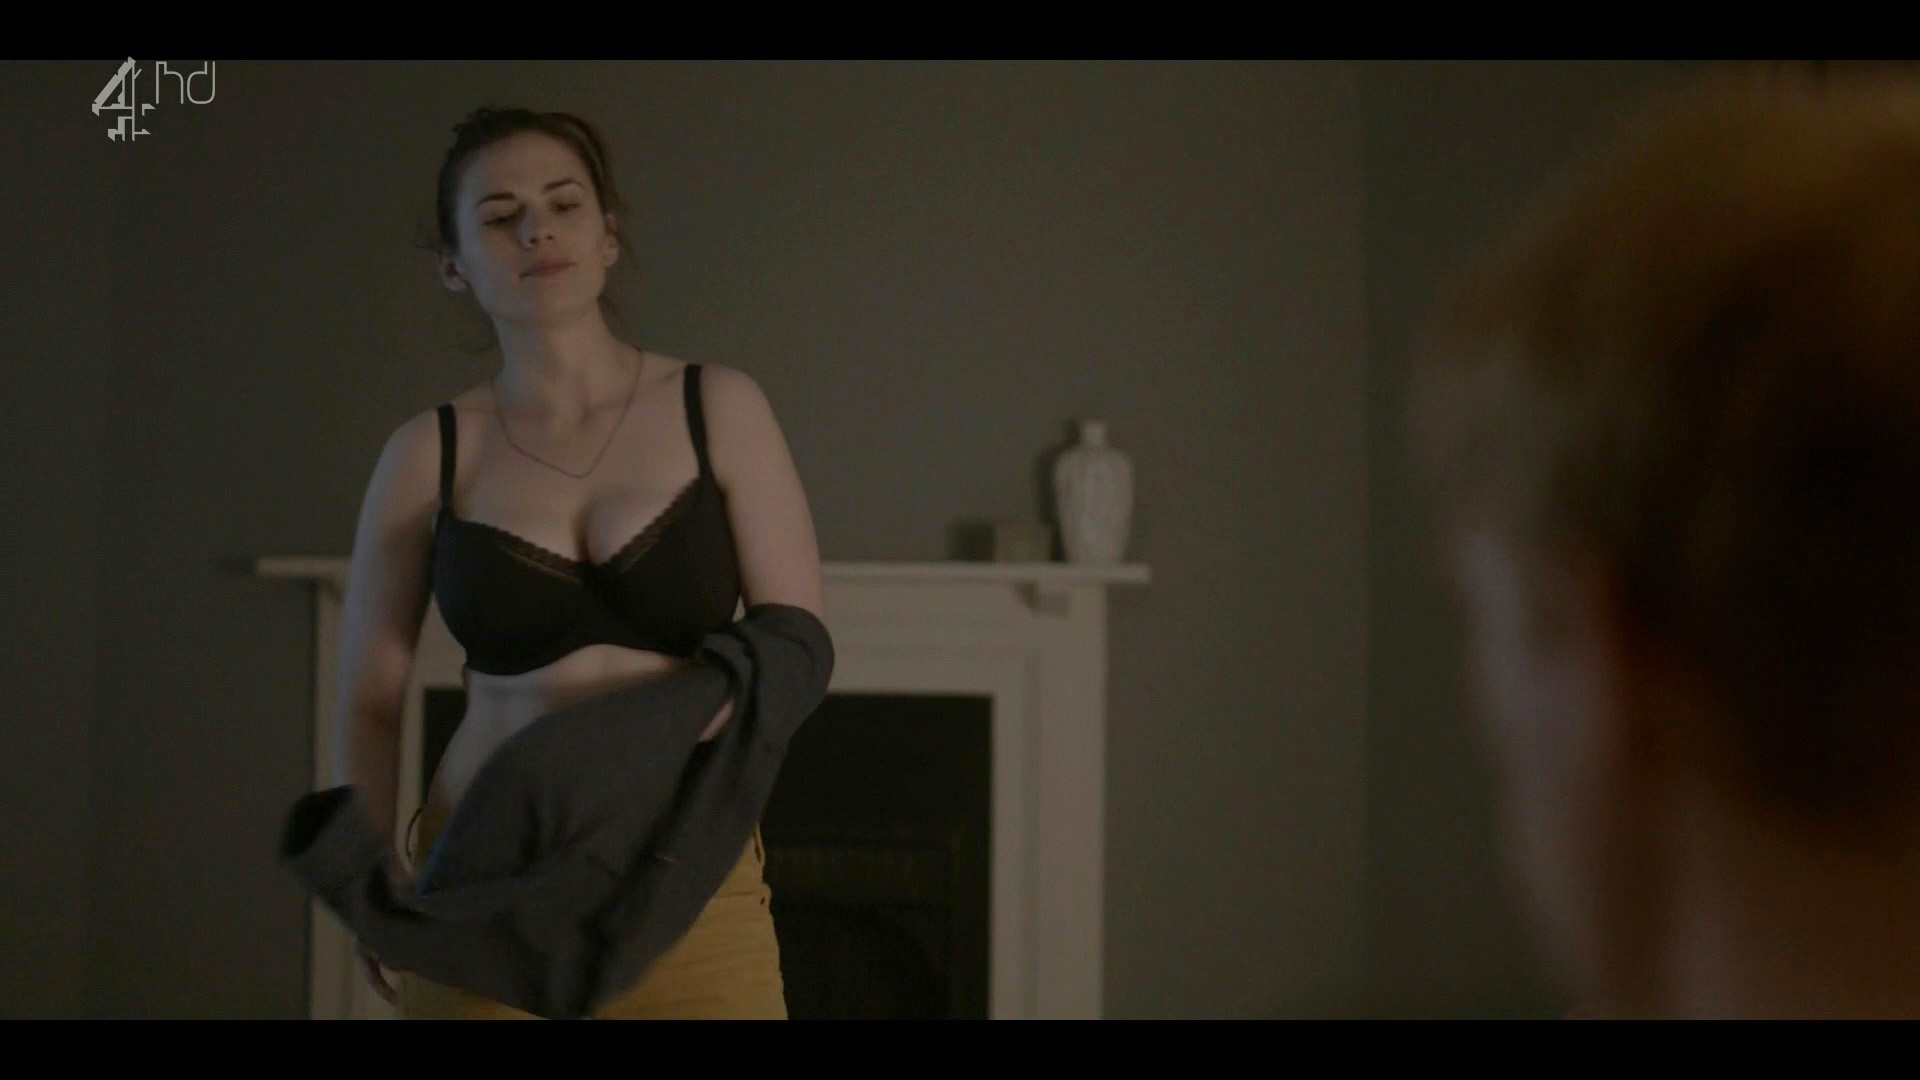 The Office Tv Nude Naked - Watch Online - Hayley Atwell â€“ Black Mirror s02e01 (2013) HD ...